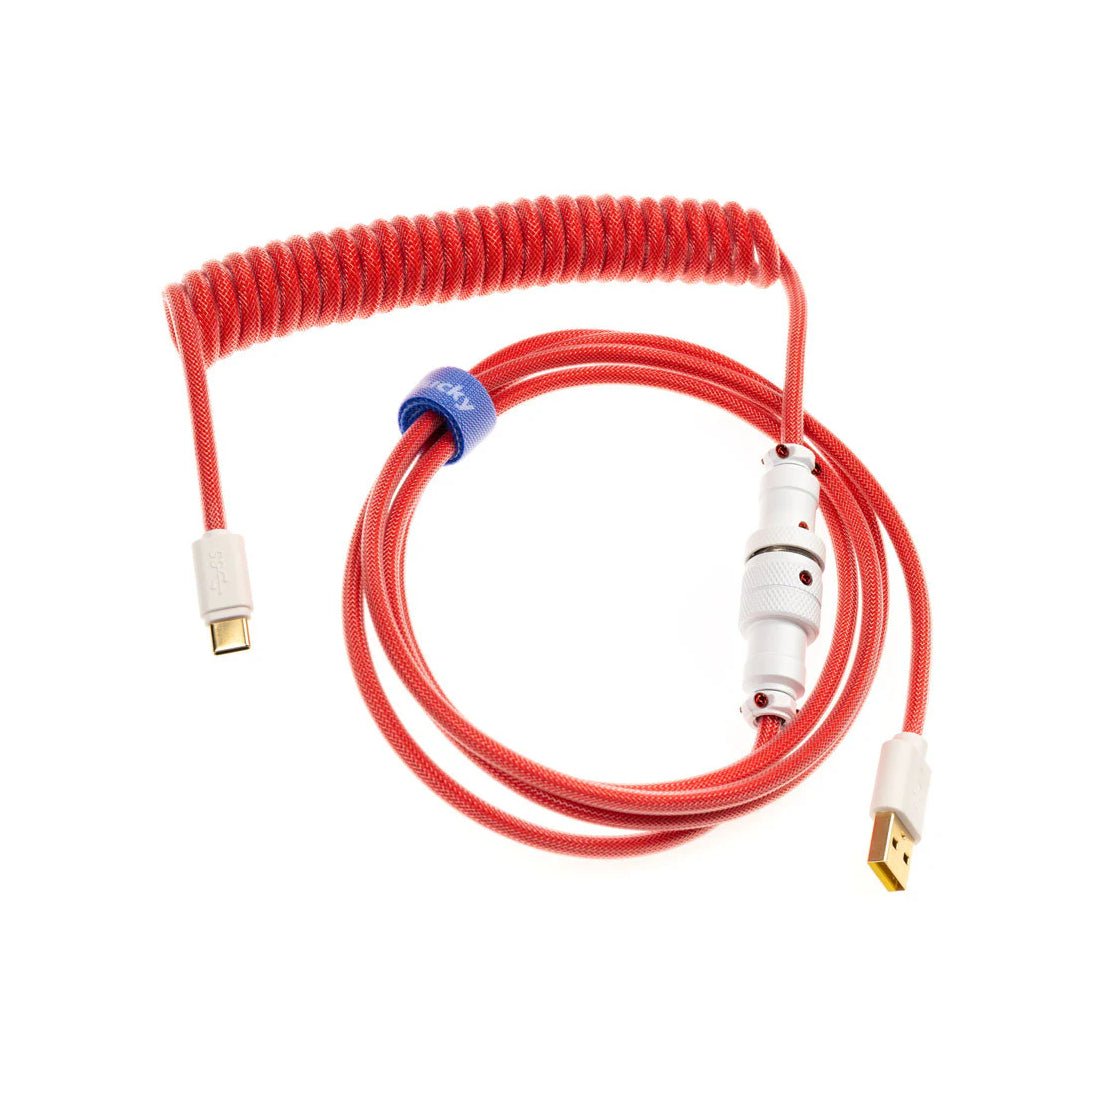 Ducky Premicord Custom Keyboard Cable - Red Edition - كابل - Store 974 | ستور ٩٧٤